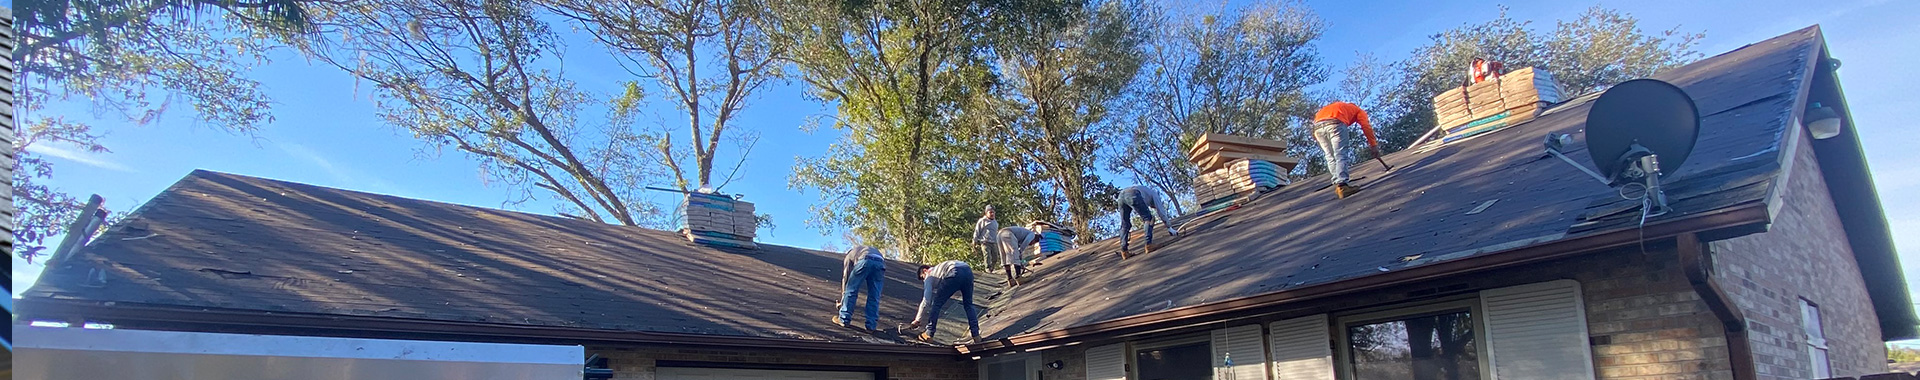 Roof install